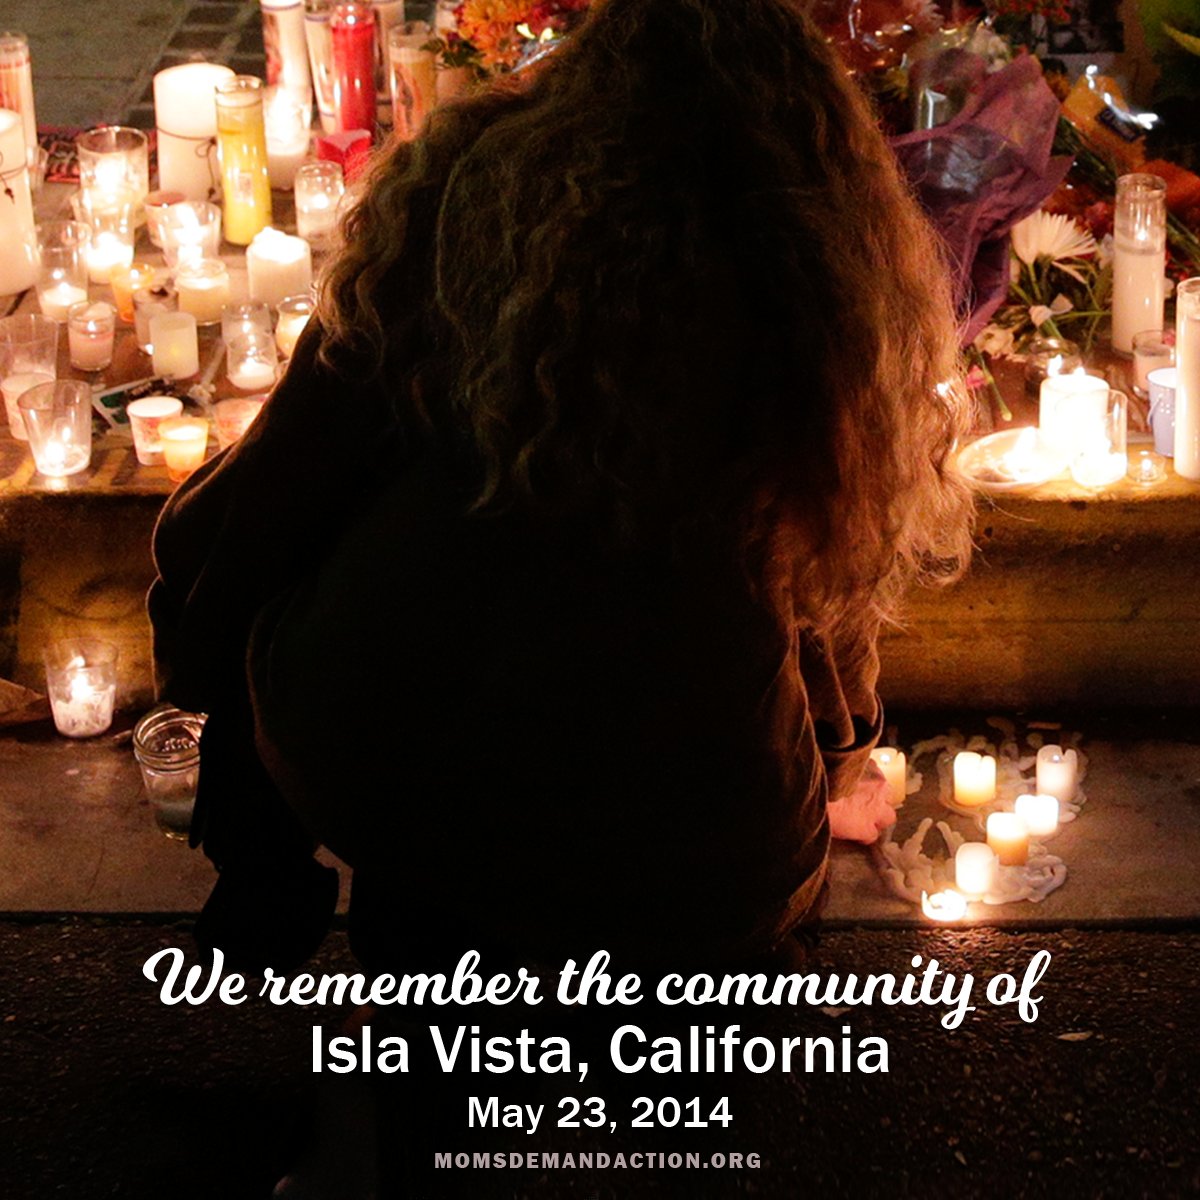 On this day ten years ago, six UC Santa Barbara students were killed and 14 other people were wounded in a hate-fueled shooting and stabbing attack in Isla Vista, California, carried out by a misogynistic extremist. The attack was a horrifying reminder of the deadly intersection